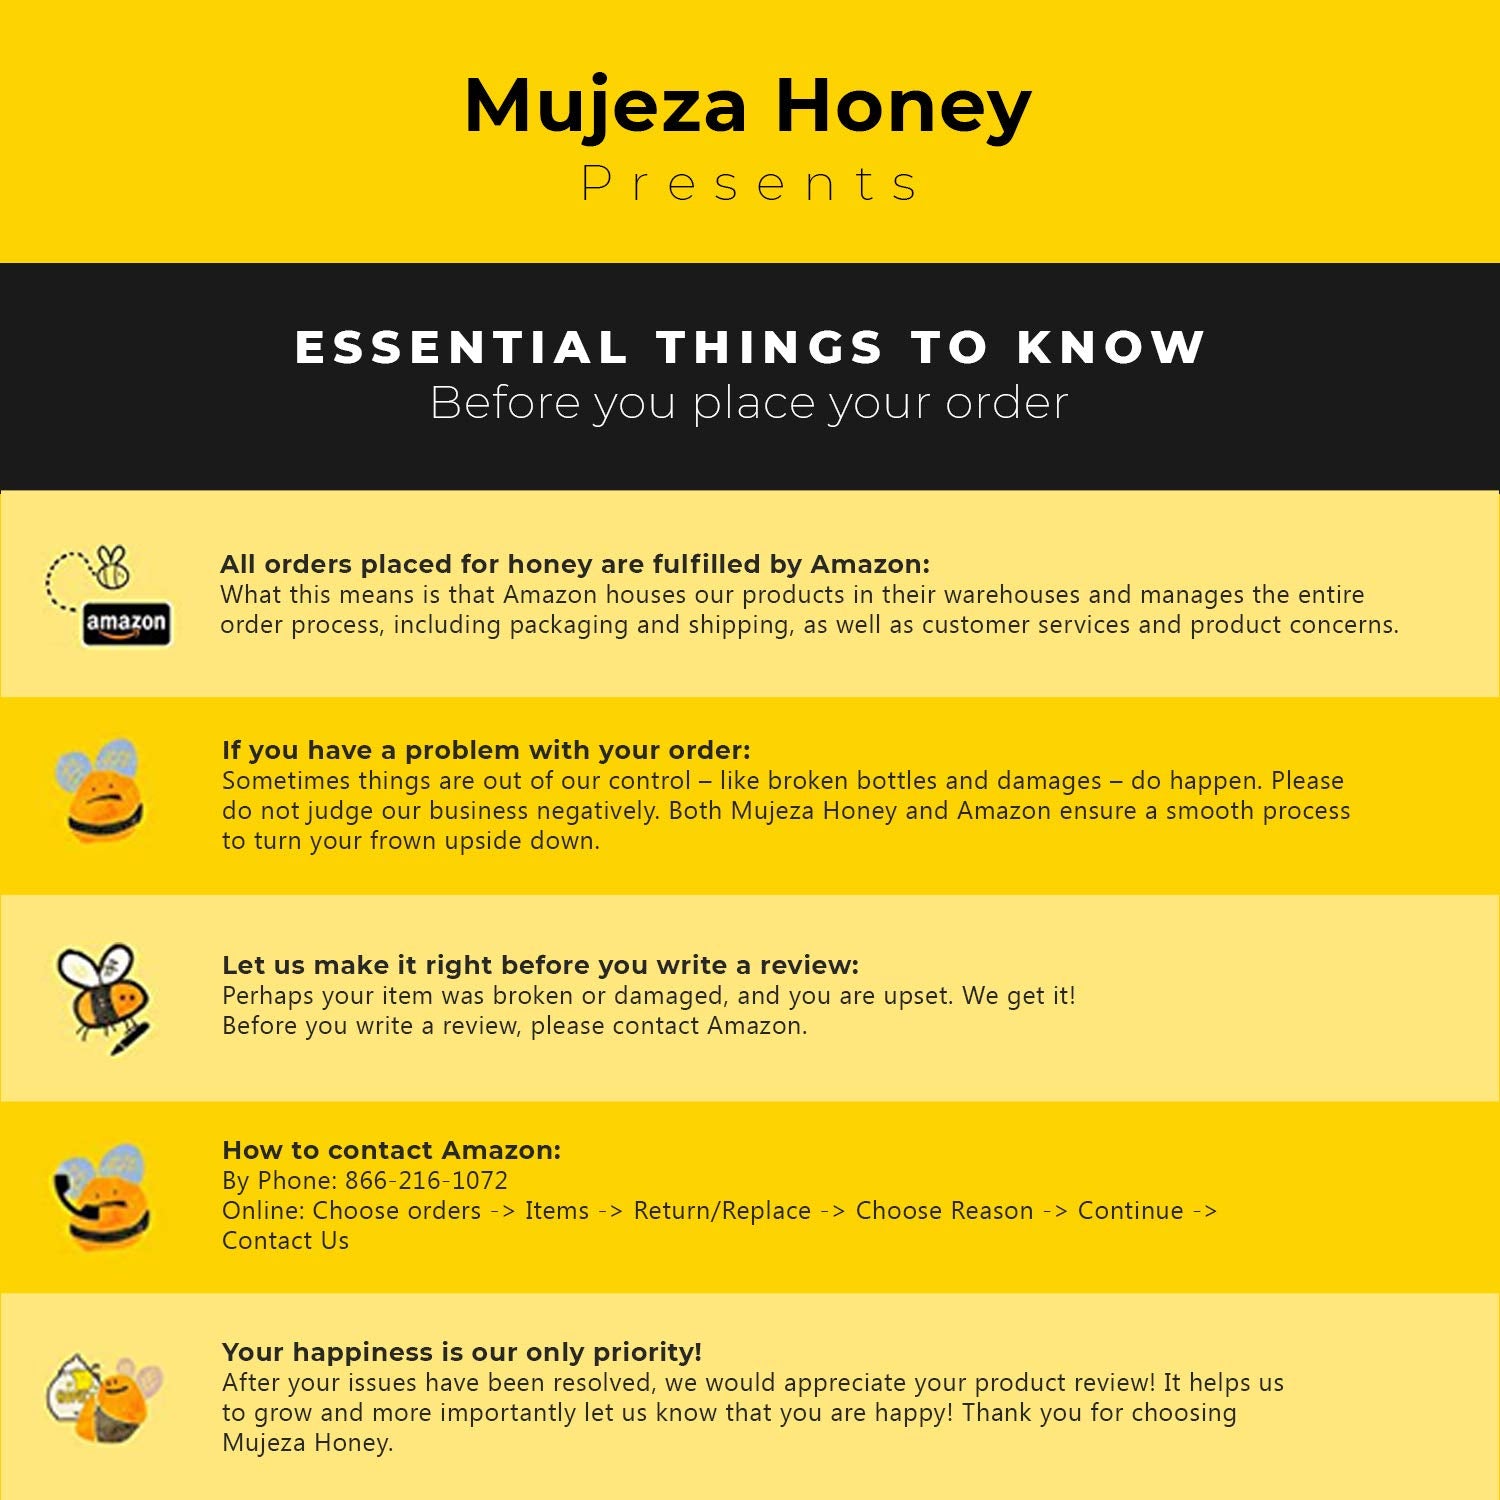 Mujeza Honey - Essential things to know about Mujeza Honey Store and products before placing your order